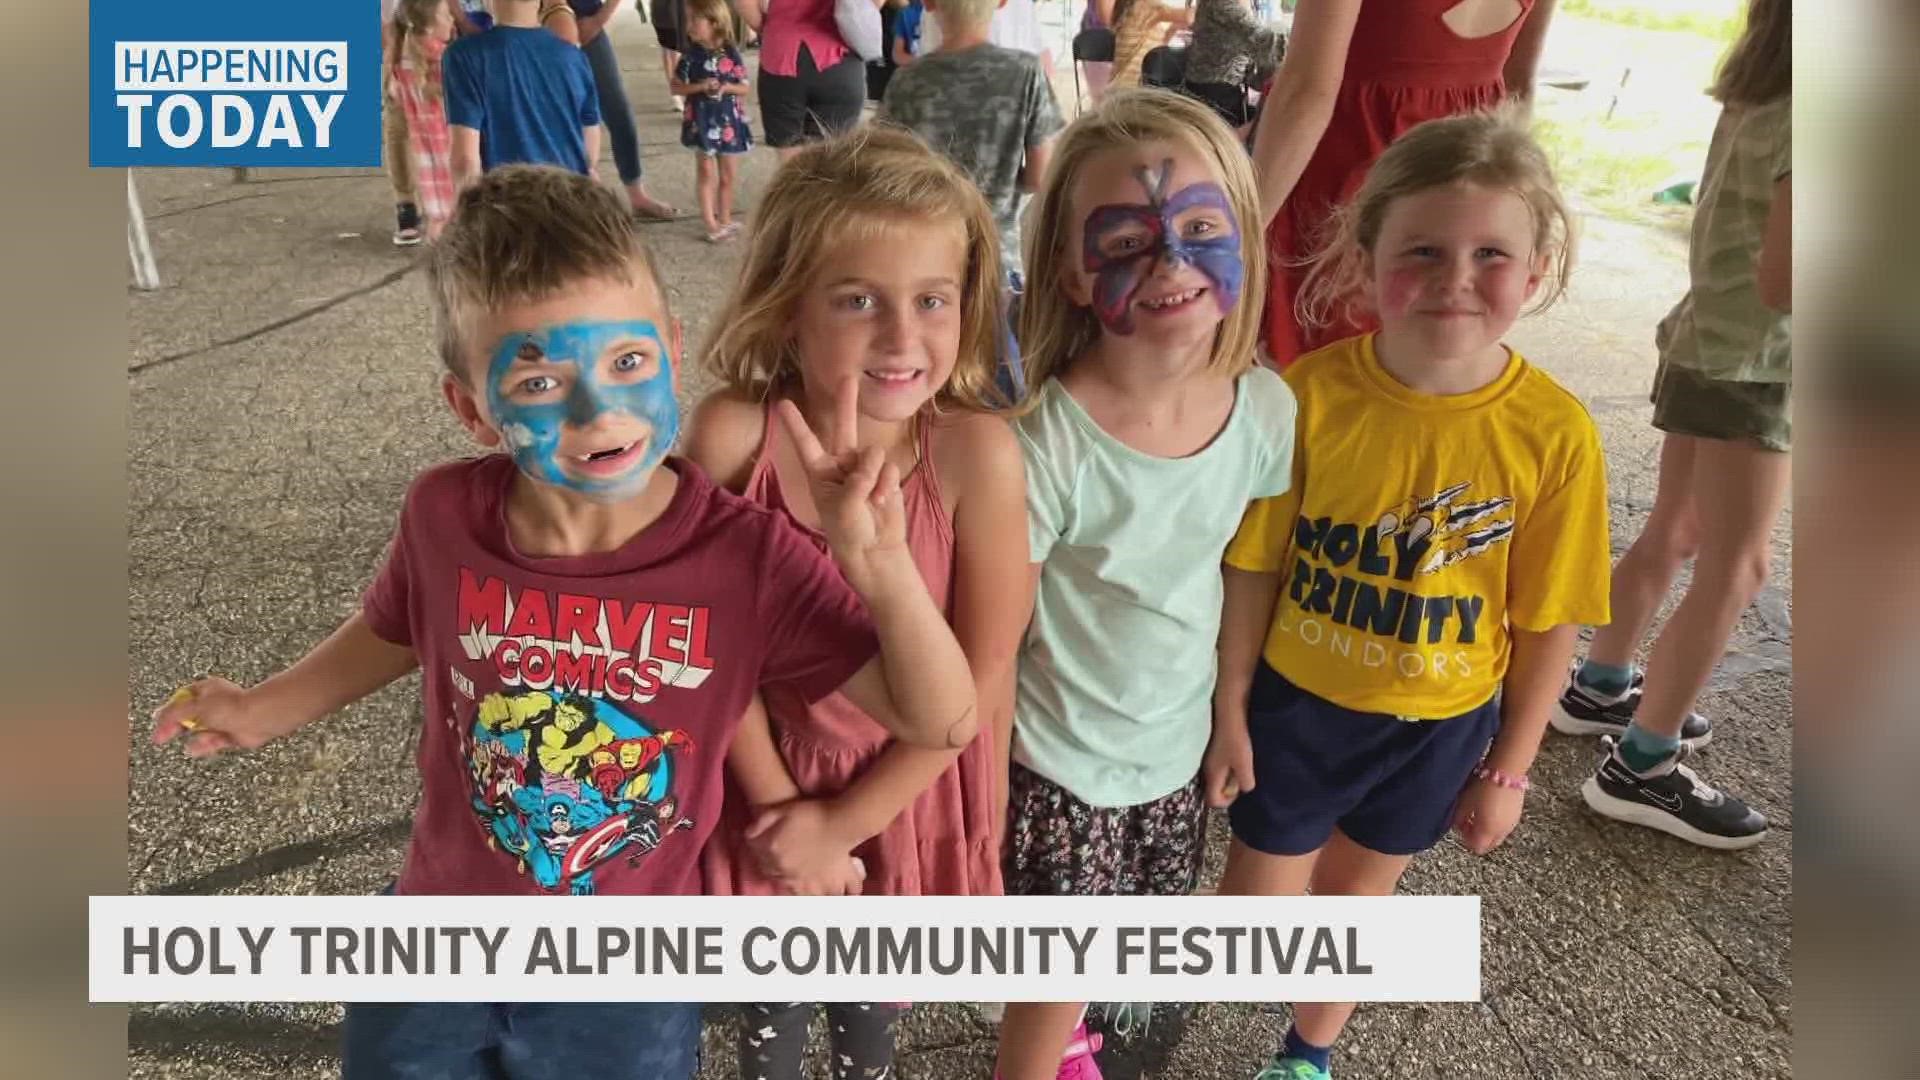 A Comstock Park staple is back! Holy Trinity Church's Alpine Community Festival is running Sept. 10 through 11.